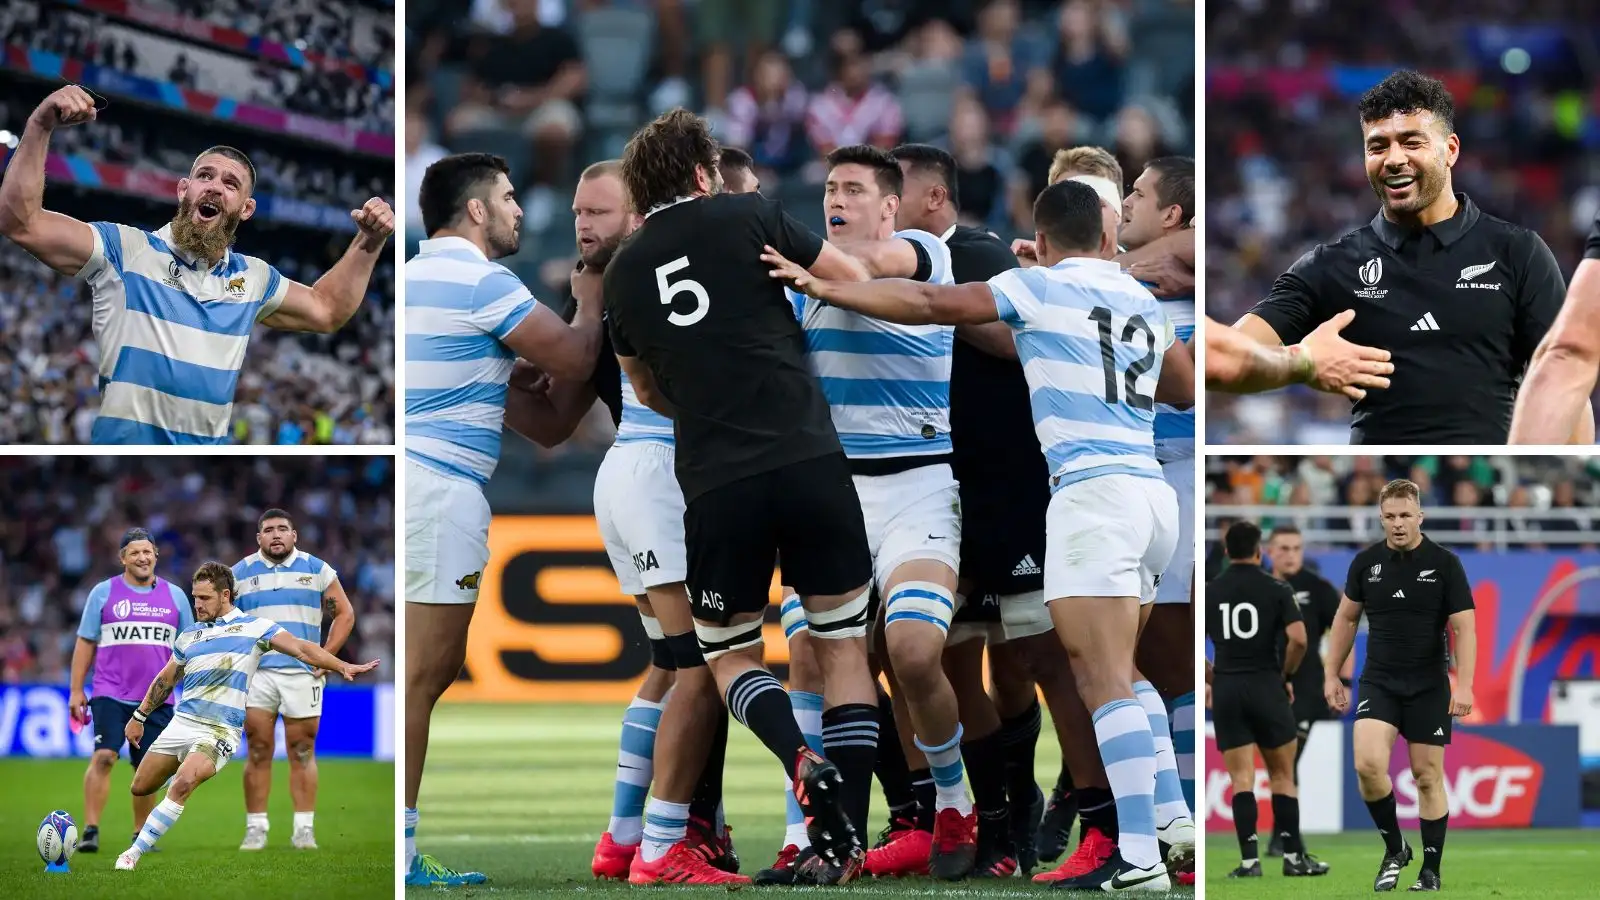 Split image featuring Argentina players Marcos Kremer and Nicolas Sanchez and All Blacks players Richie Mo'unga and Sam Cane during the Rugby World Cup.